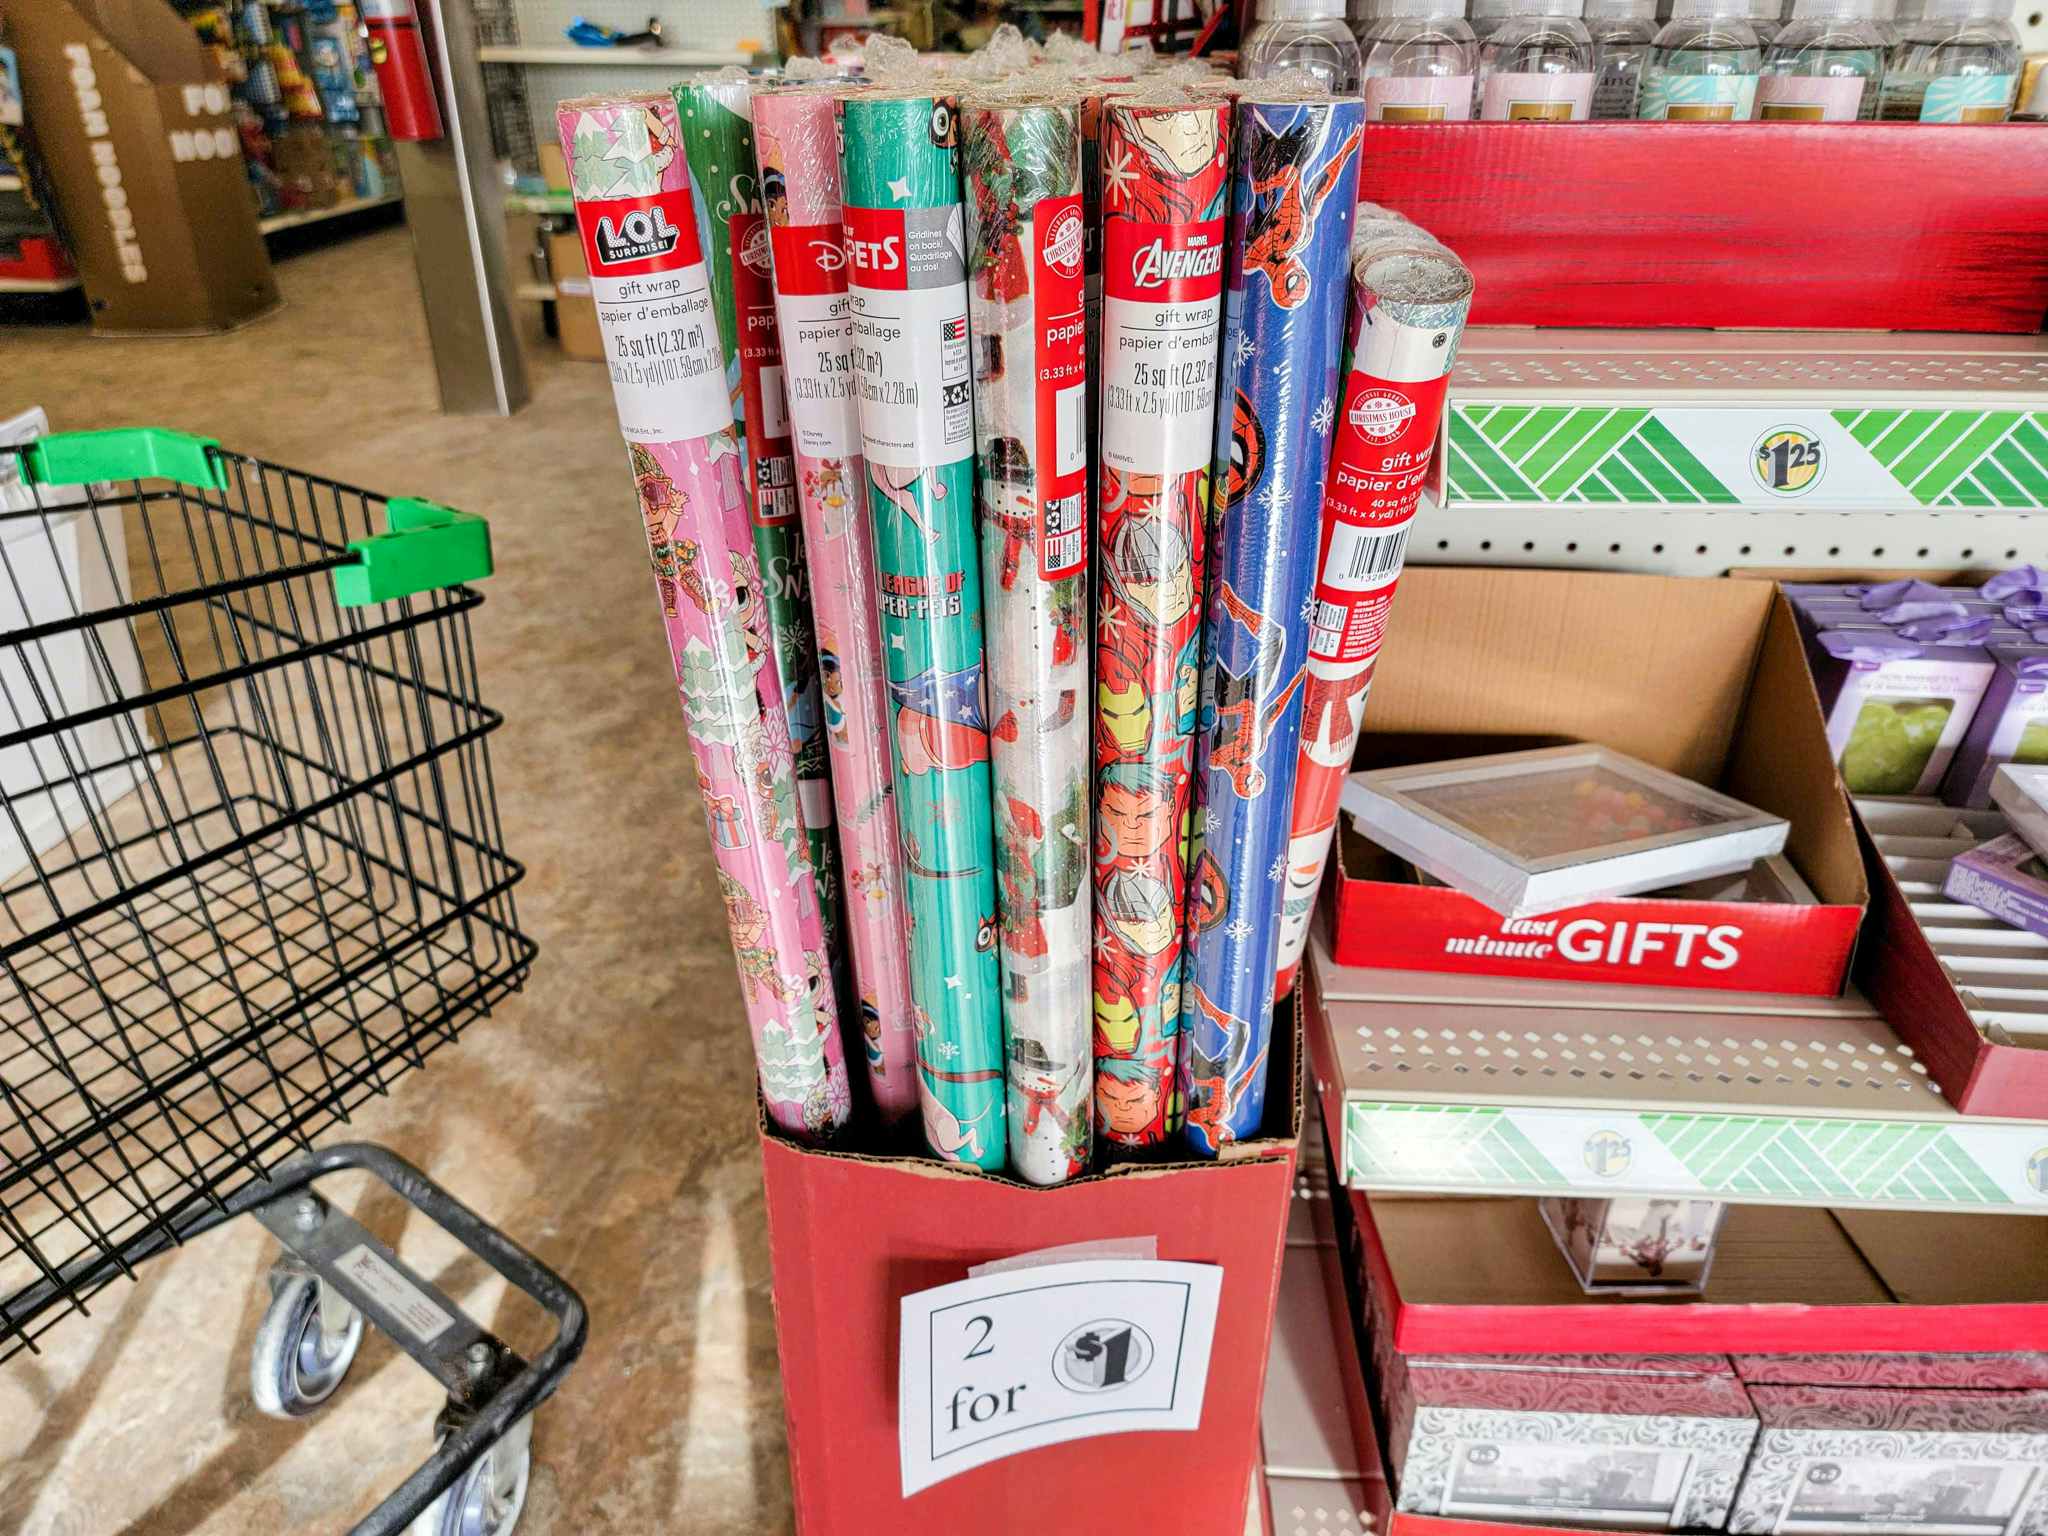 New Hallmark Heavy weight gift wrapping paper 3 roll pack 125 sq ft total